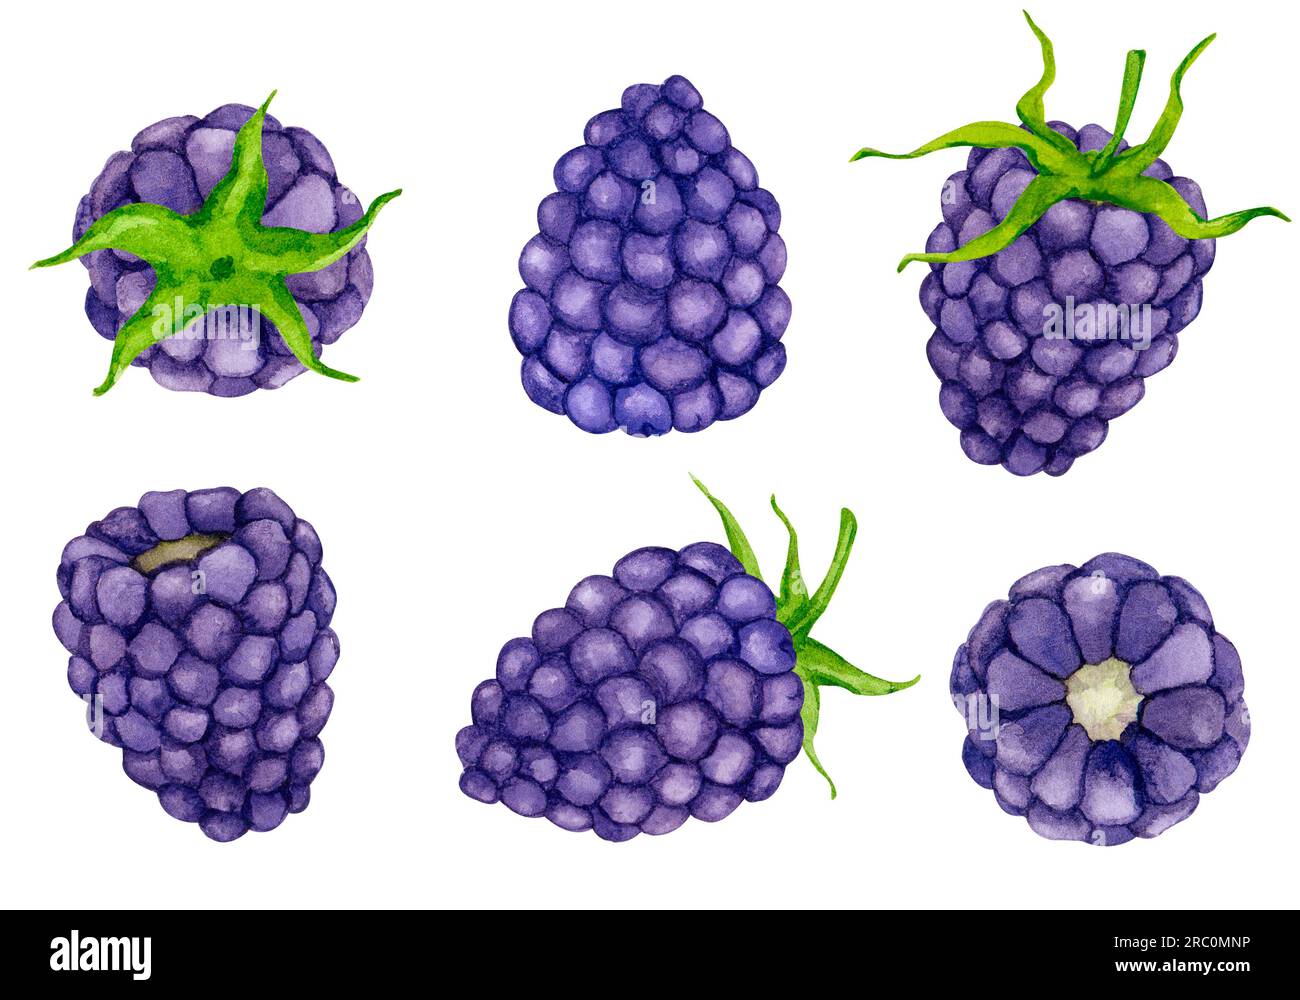 Watercolor blackberry set isolated on white background. Design elements for packaging, logo, cards, etc. Stock Photo